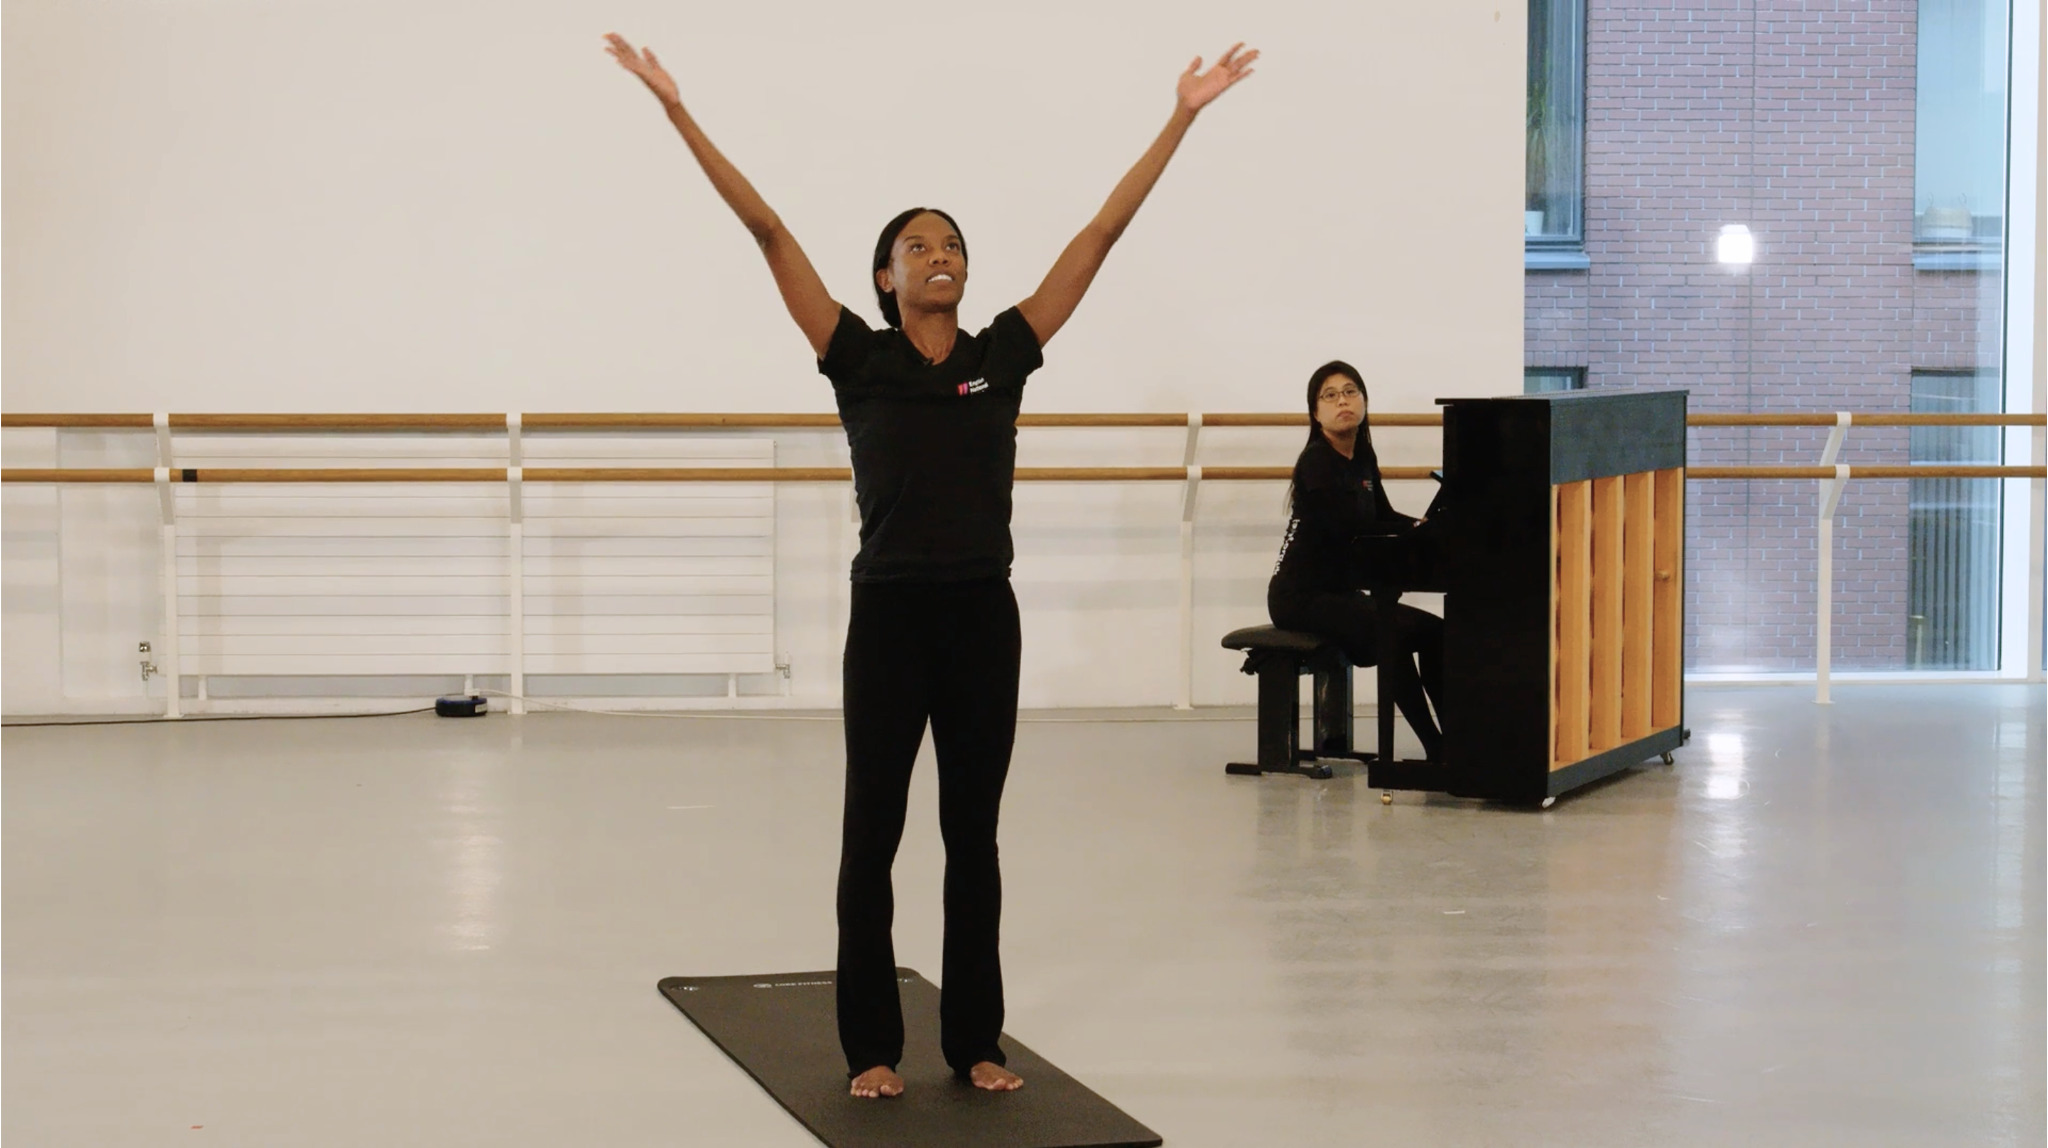 A woman in black attire stands on a yoga mat, her arms lifted towards the ceiling